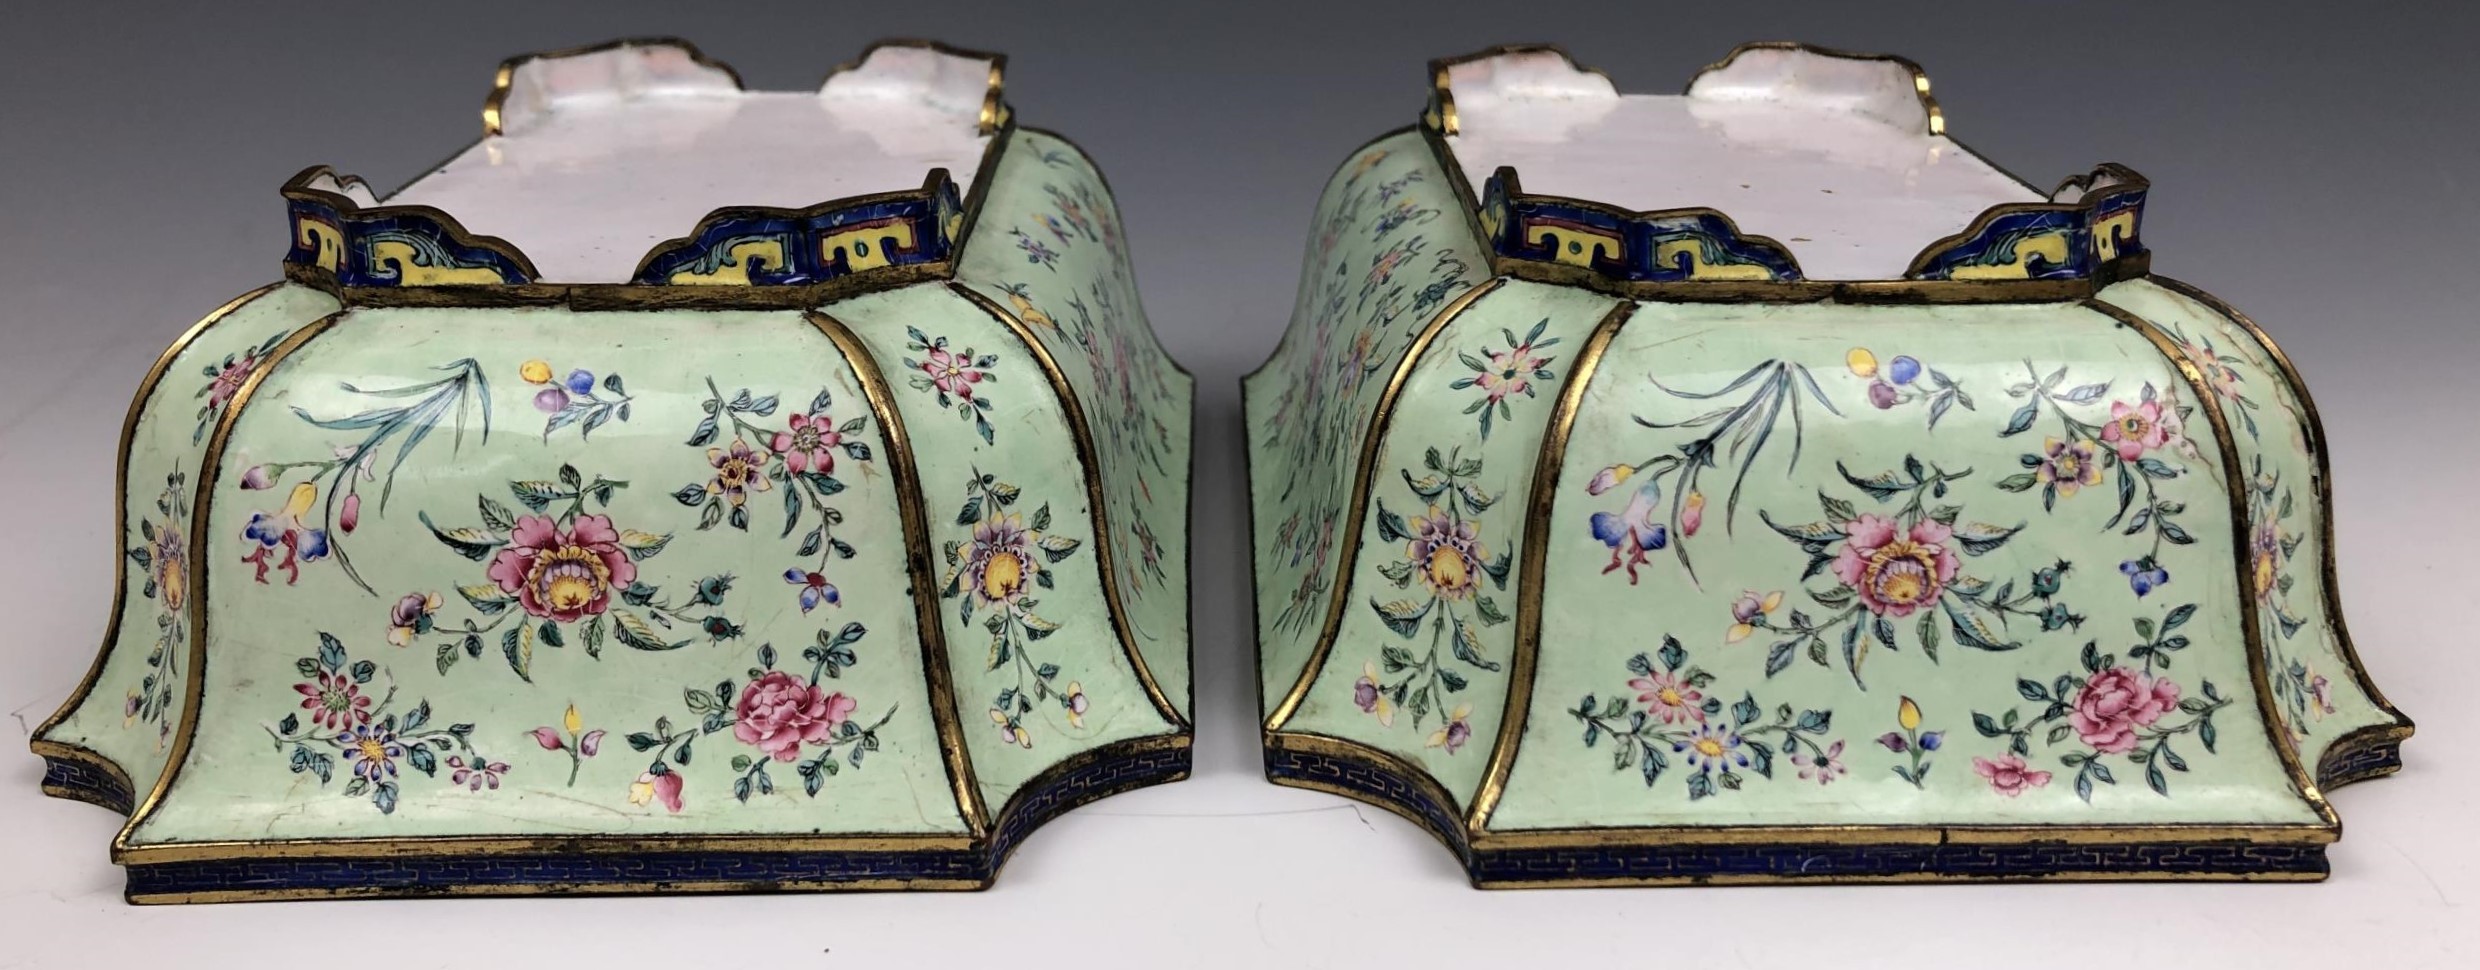 A pair of Chinese Canton enamel jardinieres, decorated flowers on a pale green ground, 19.5 cm - Image 4 of 6